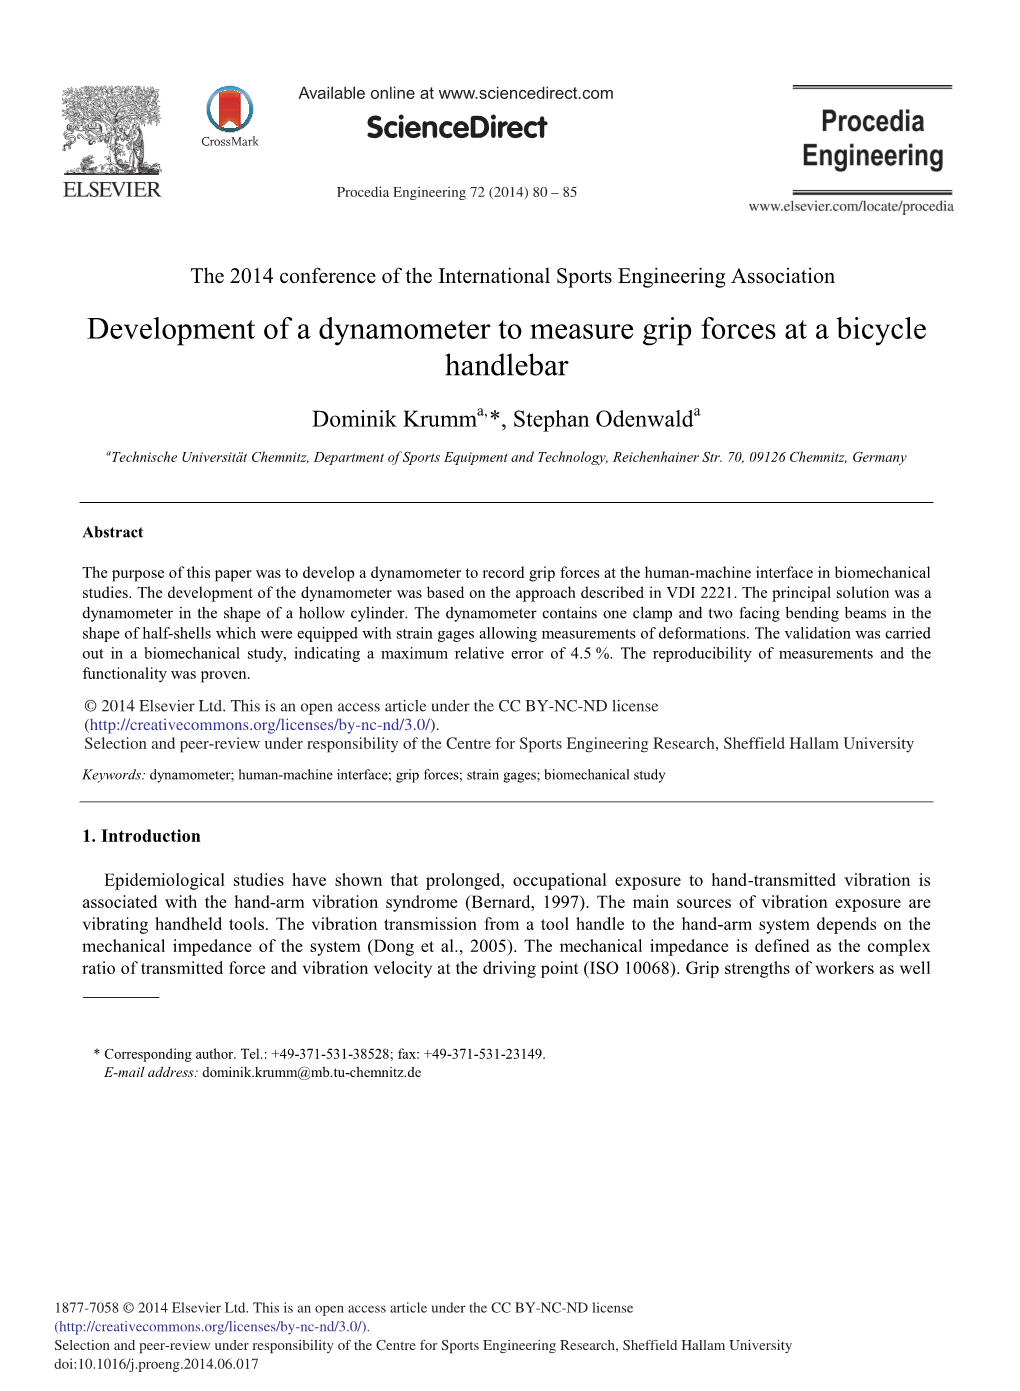 Development of a Dynamometer to Measure Grip Forces at a Bicycle Handlebar